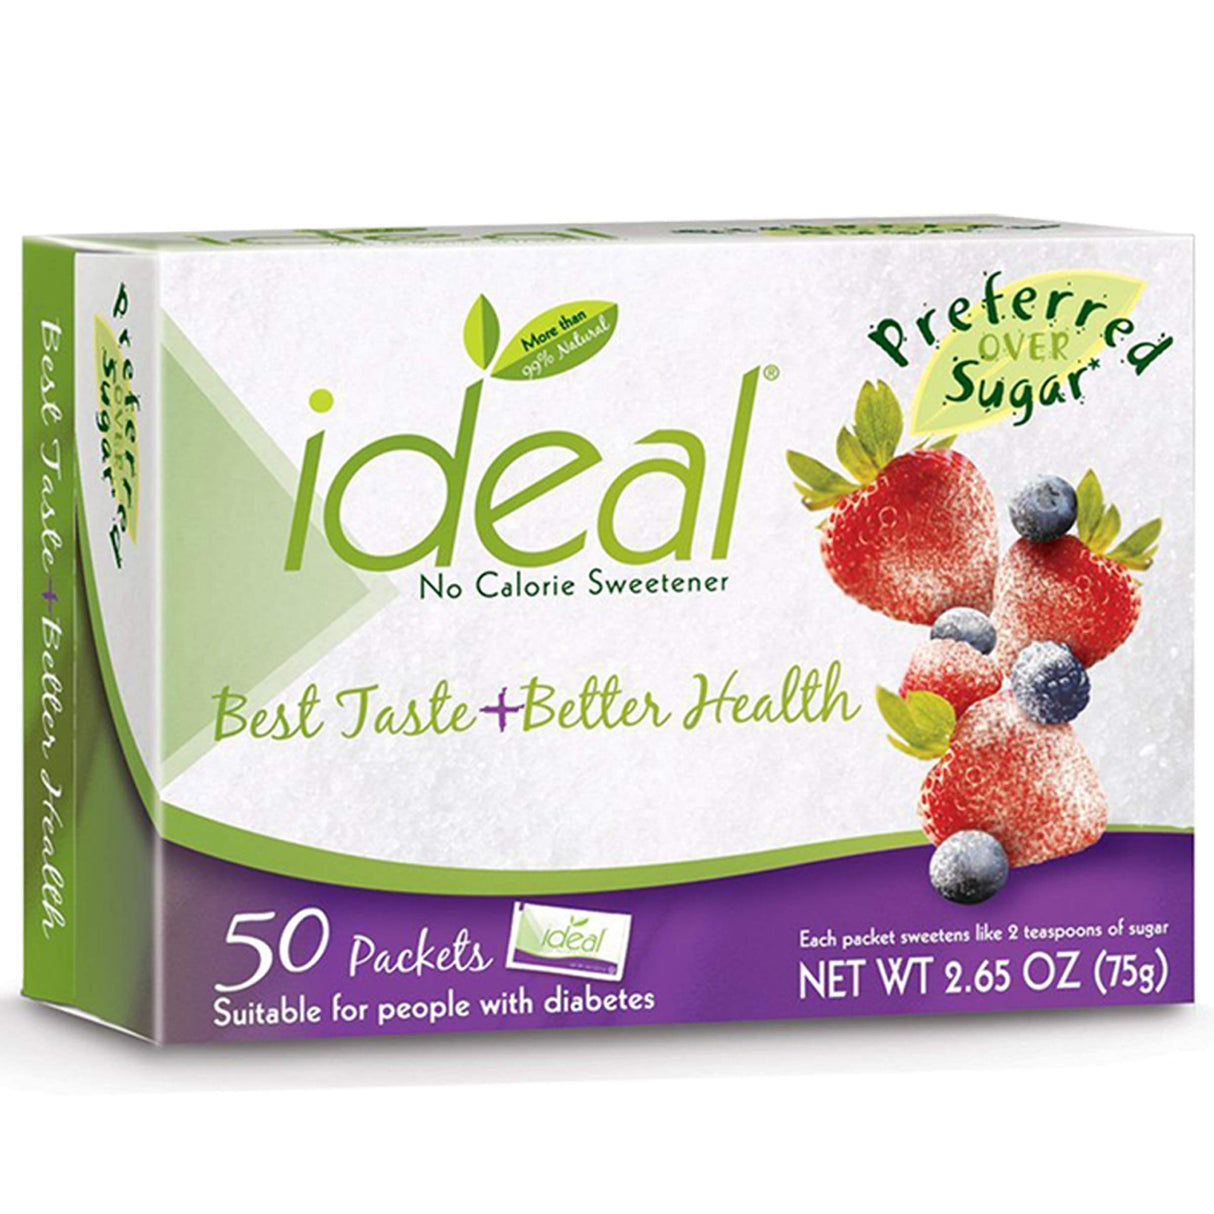 Ideal No Calorie Xylitol Sweetener: Natural, Non GMO, Keto Friendly Sugar Substitute and Alternative, 50 Count Packets (Pack of 12)